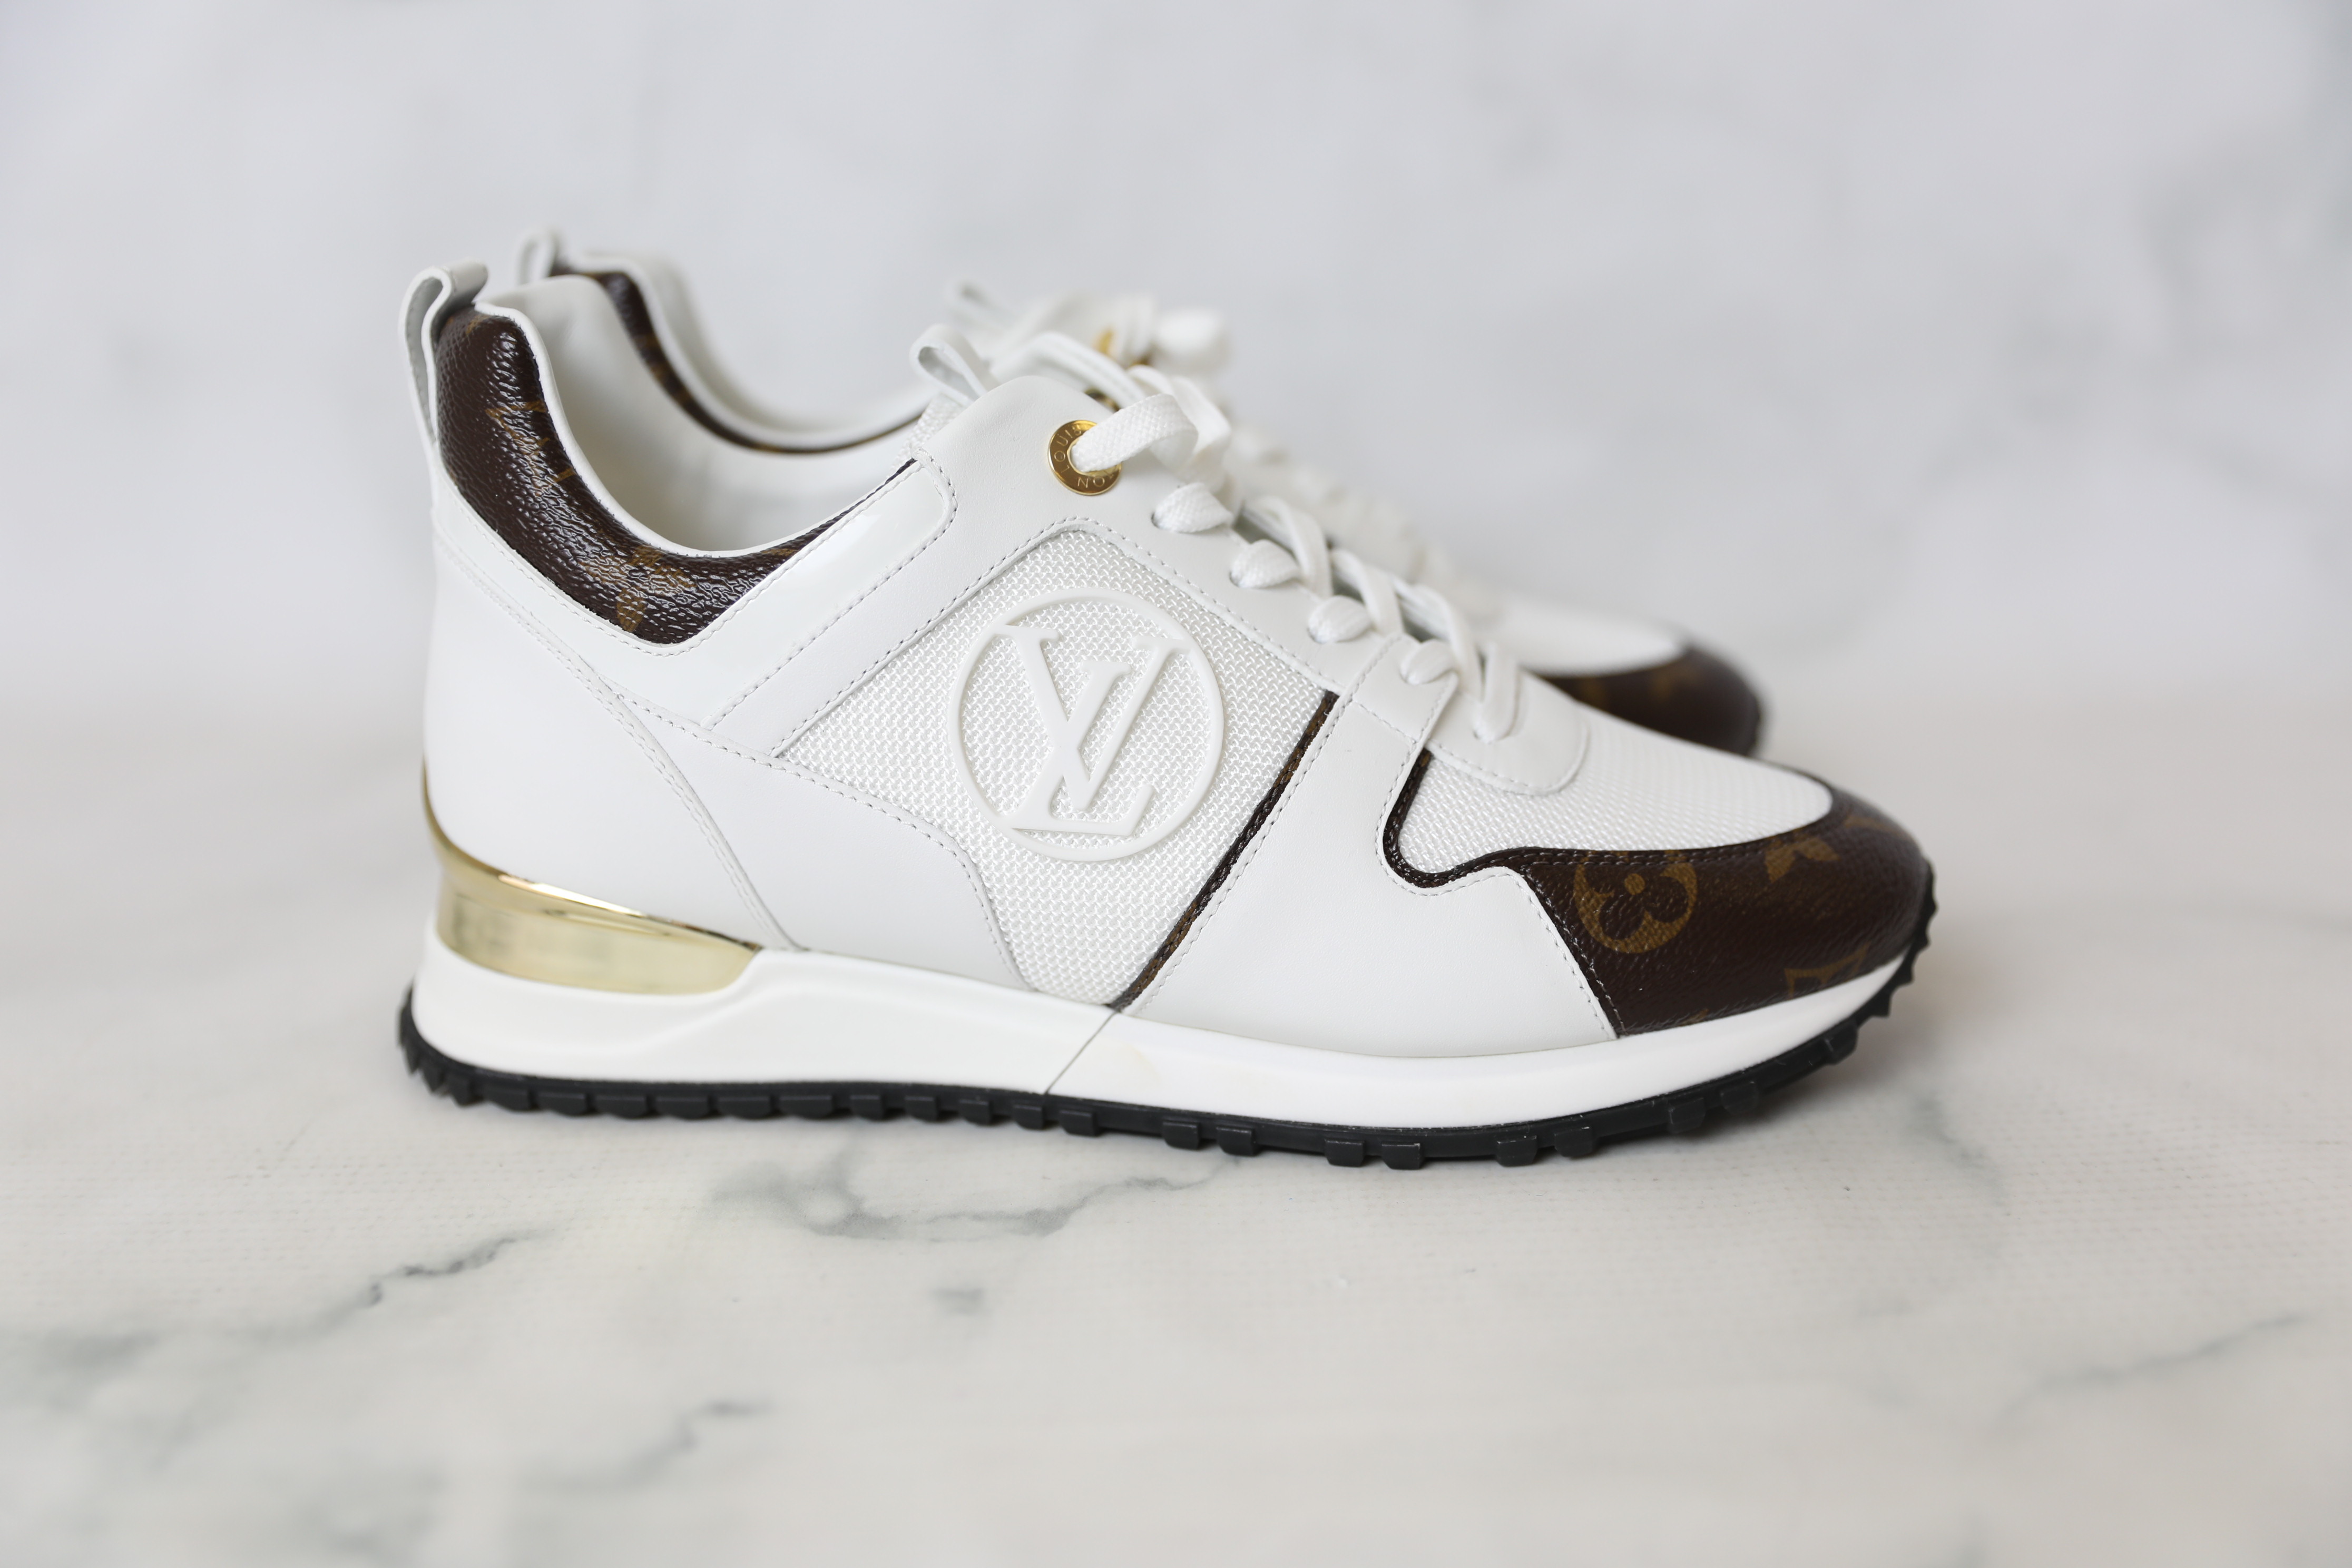 Louis Vuitton Runaway Sneakers Size 10 With Box for Sale in San Diego, CA -  OfferUp